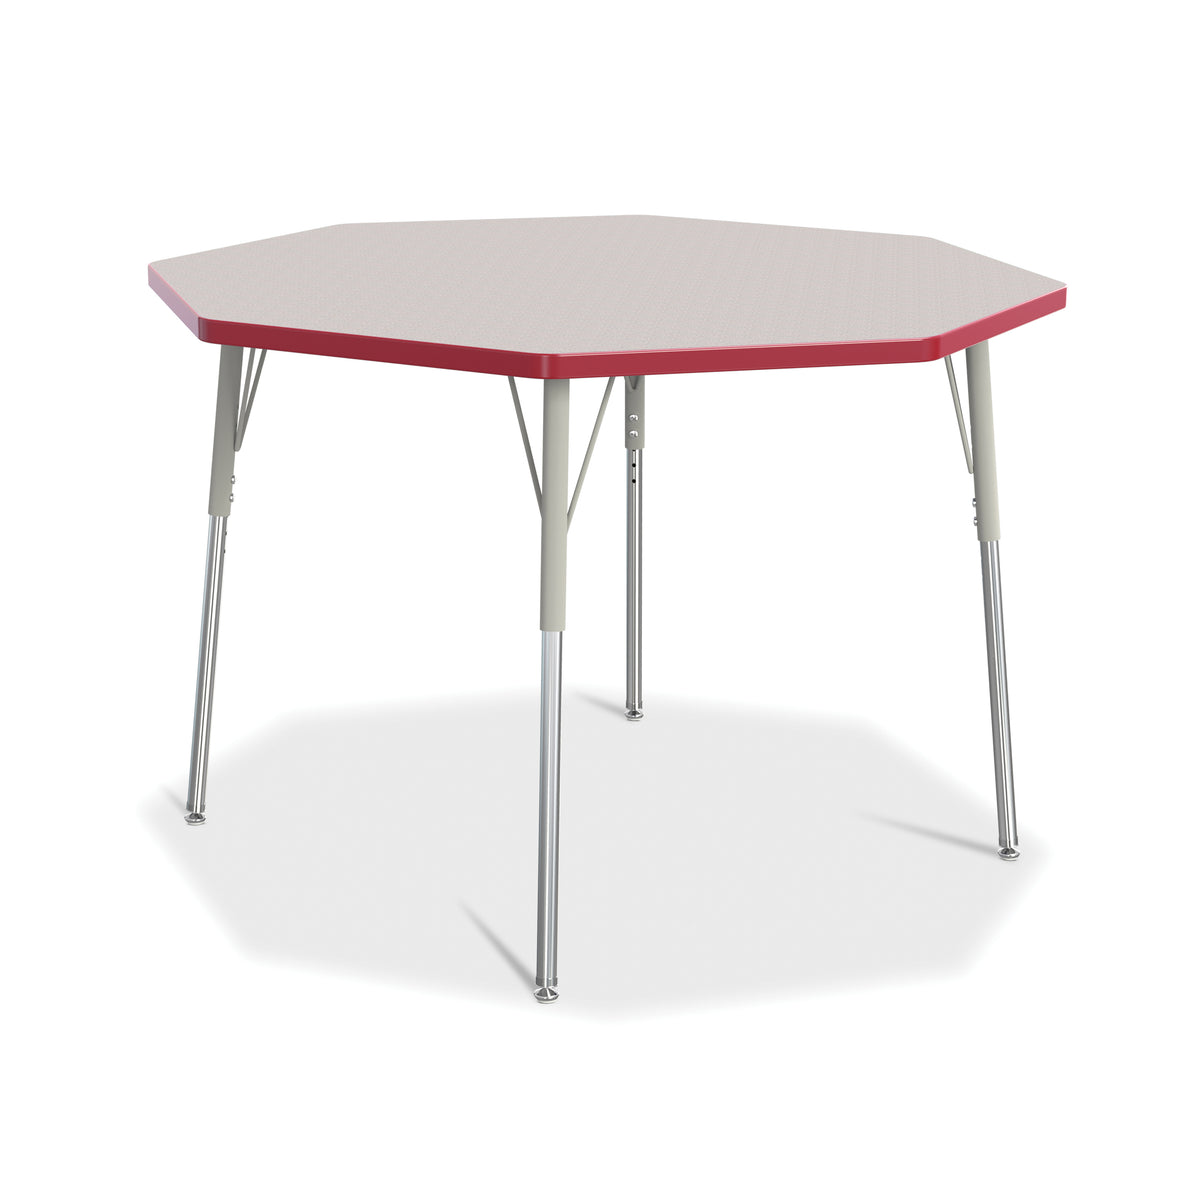 6428JCA008, Berries Octagon Activity Table - 48" X 48", A-height - Freckled Gray/Red/Gray